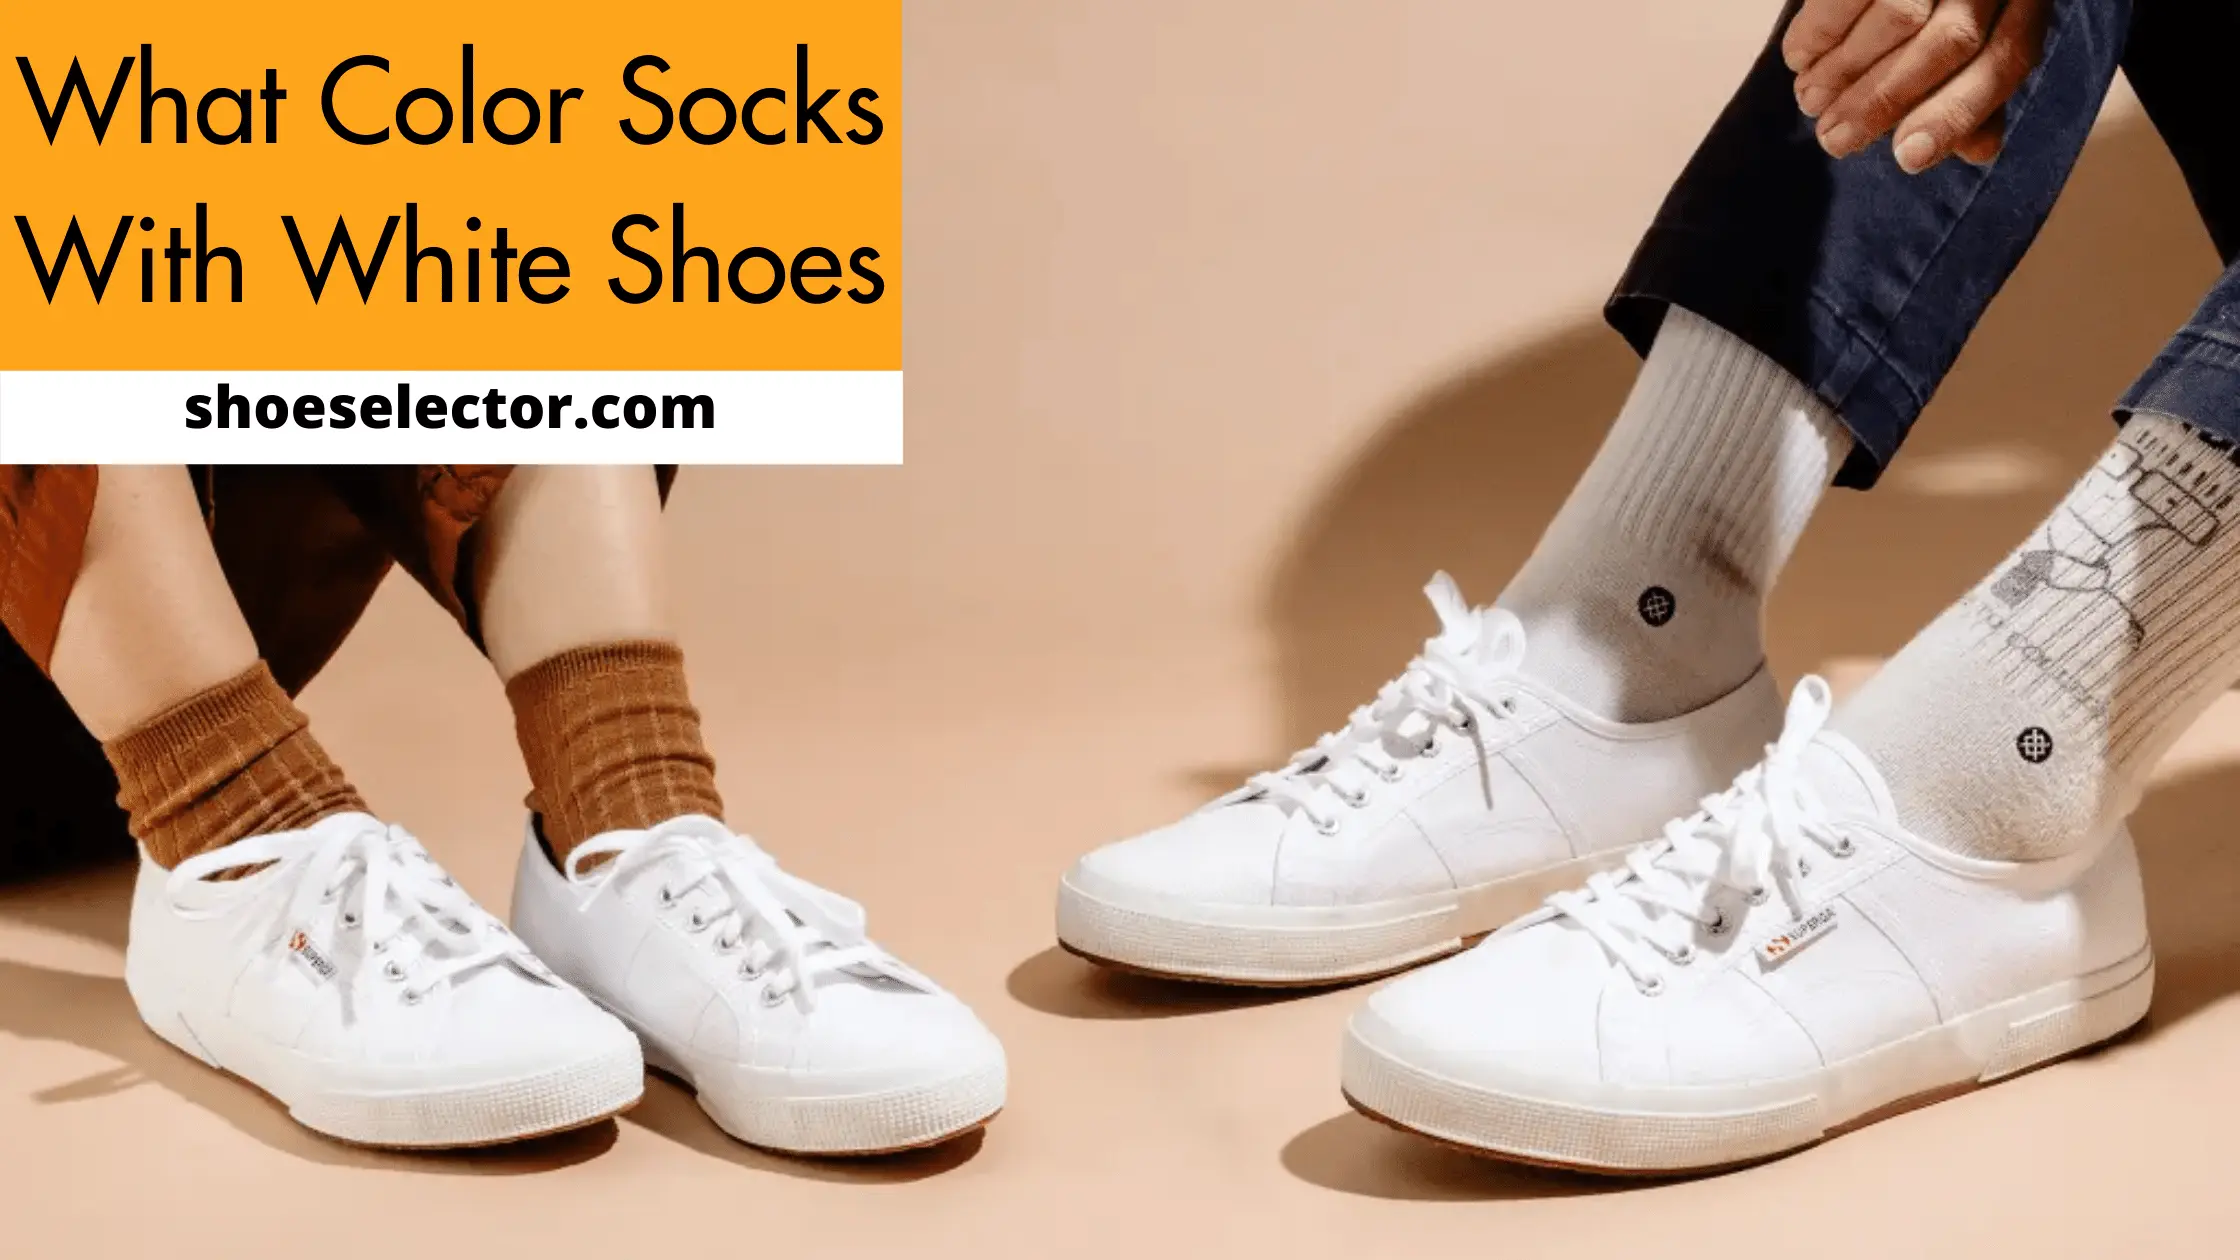 What Color Socks With White Shoes? - Recommended Guide